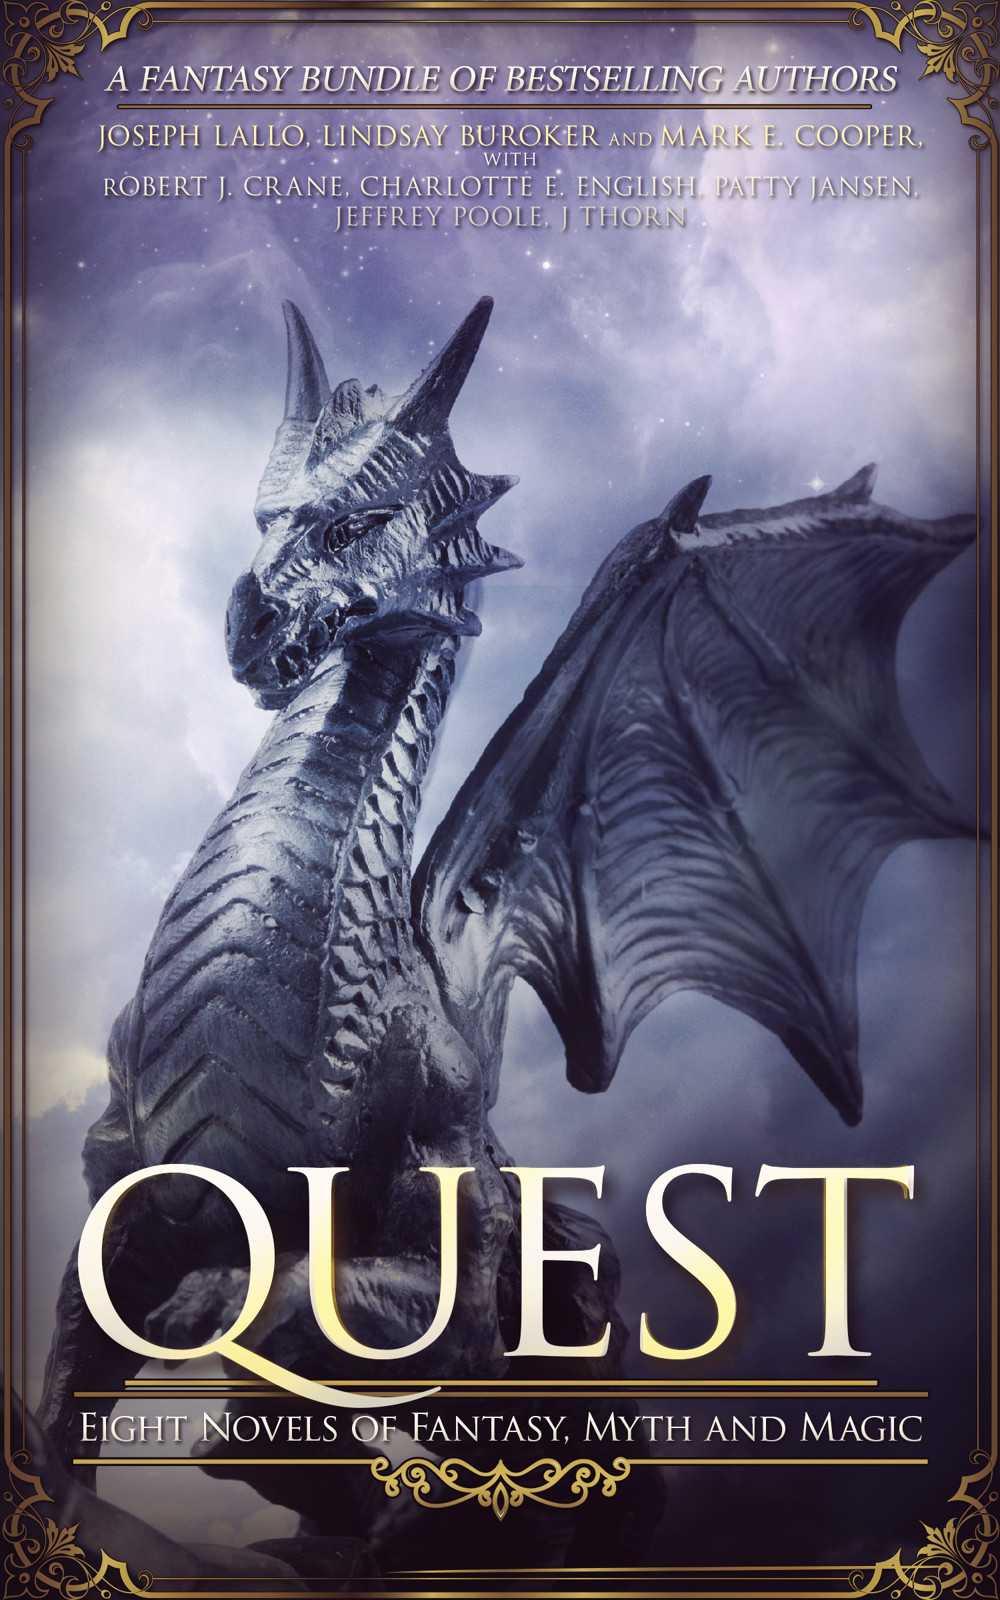 Quest: Eight Novels of Fantasy, Myth, and Magic: (Free Books Featuring Dragons, Assassins, Wizards and Warriors in Adventures of Epic Fantasy, Sword and Sorcery, Dark Fantasy, and More!)